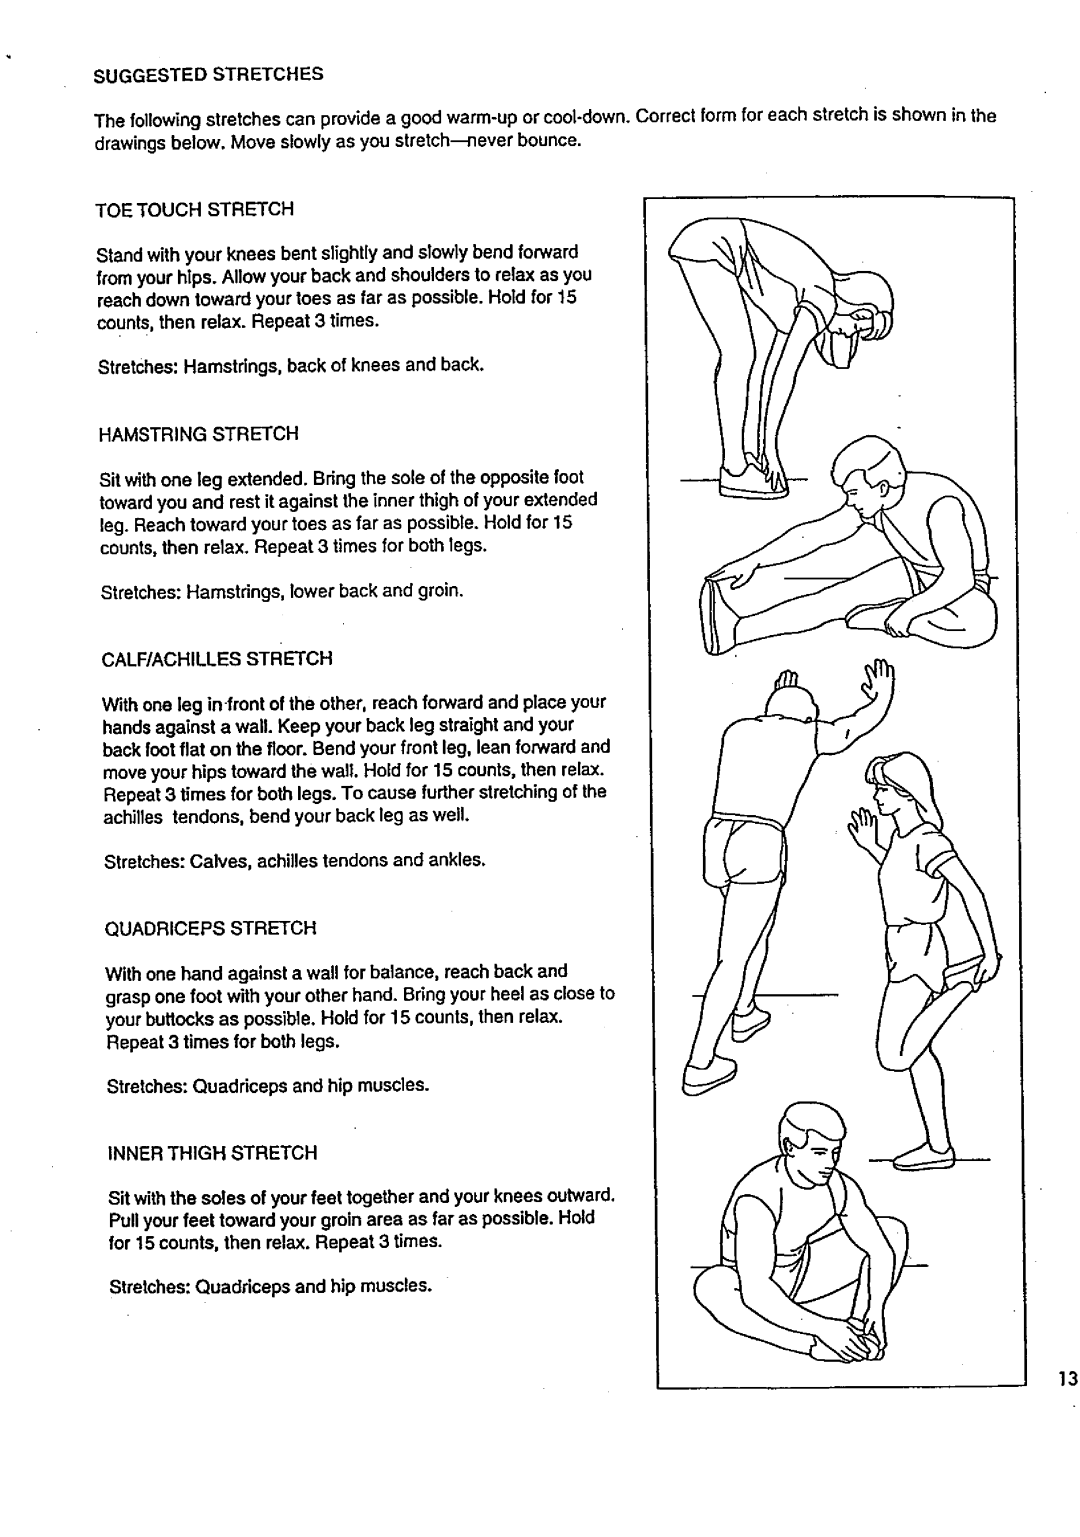 Sears 831.29723 owner manual Suggested Stretches 